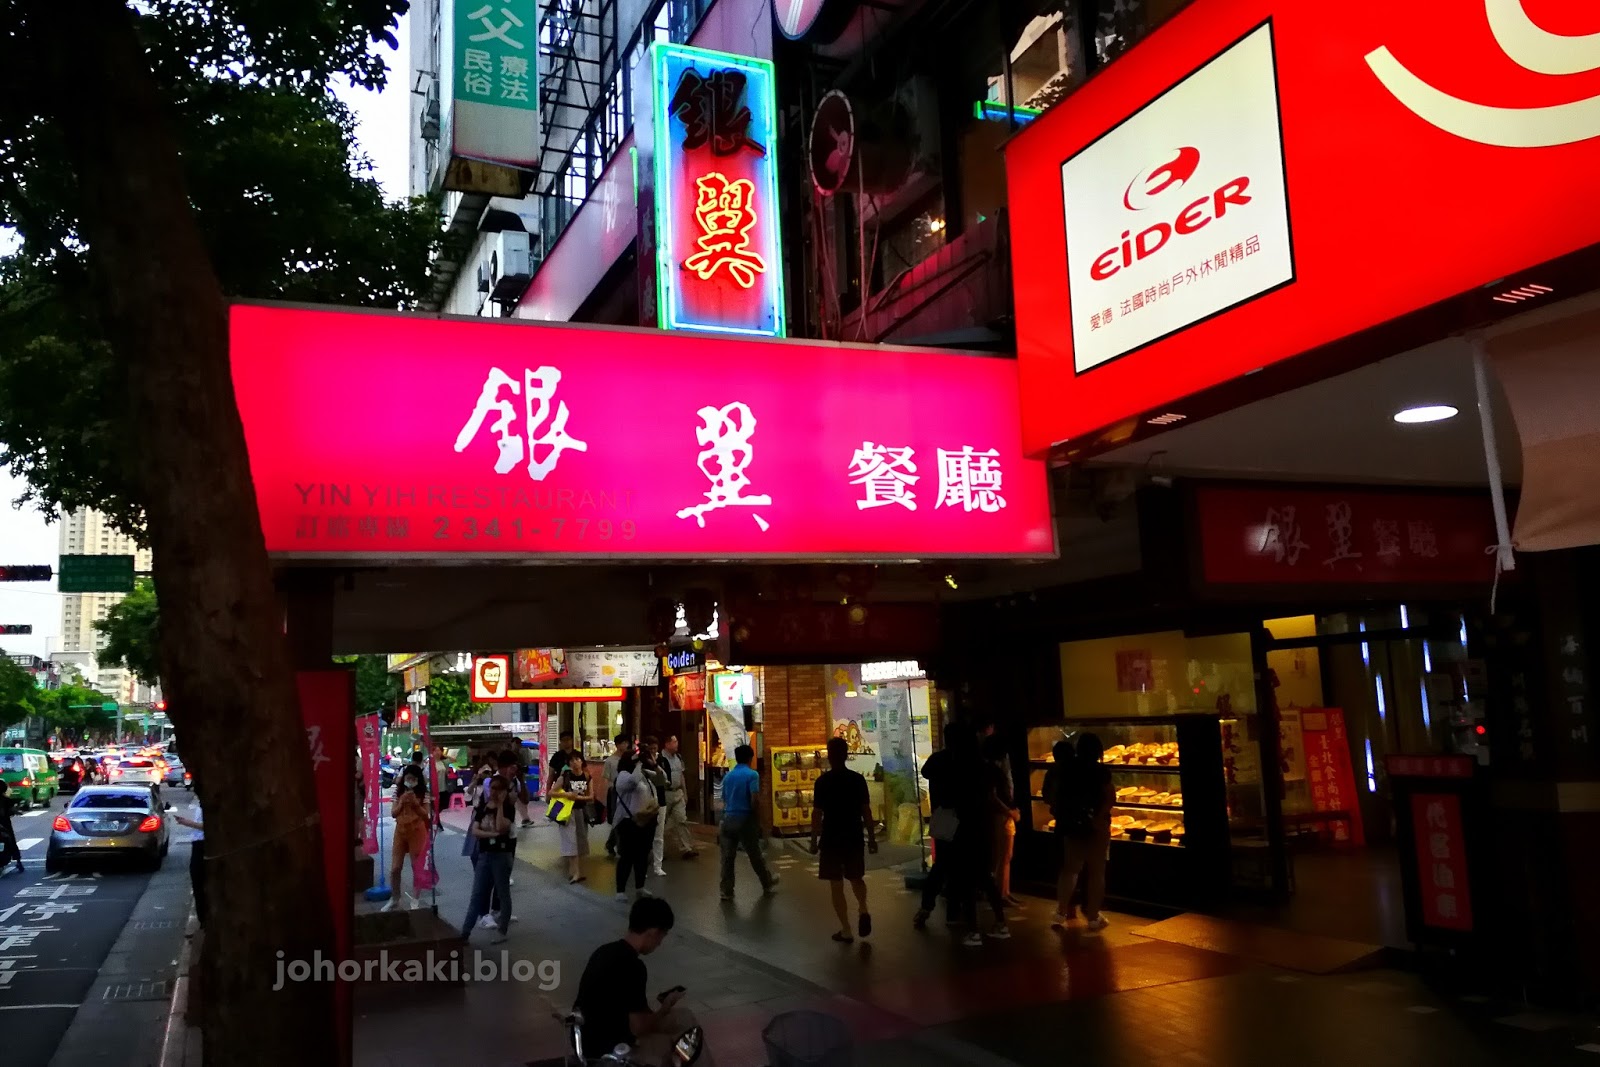 High Five! 5 Top Restaurants to Try in Taipei |Johor Kaki Travels for Food